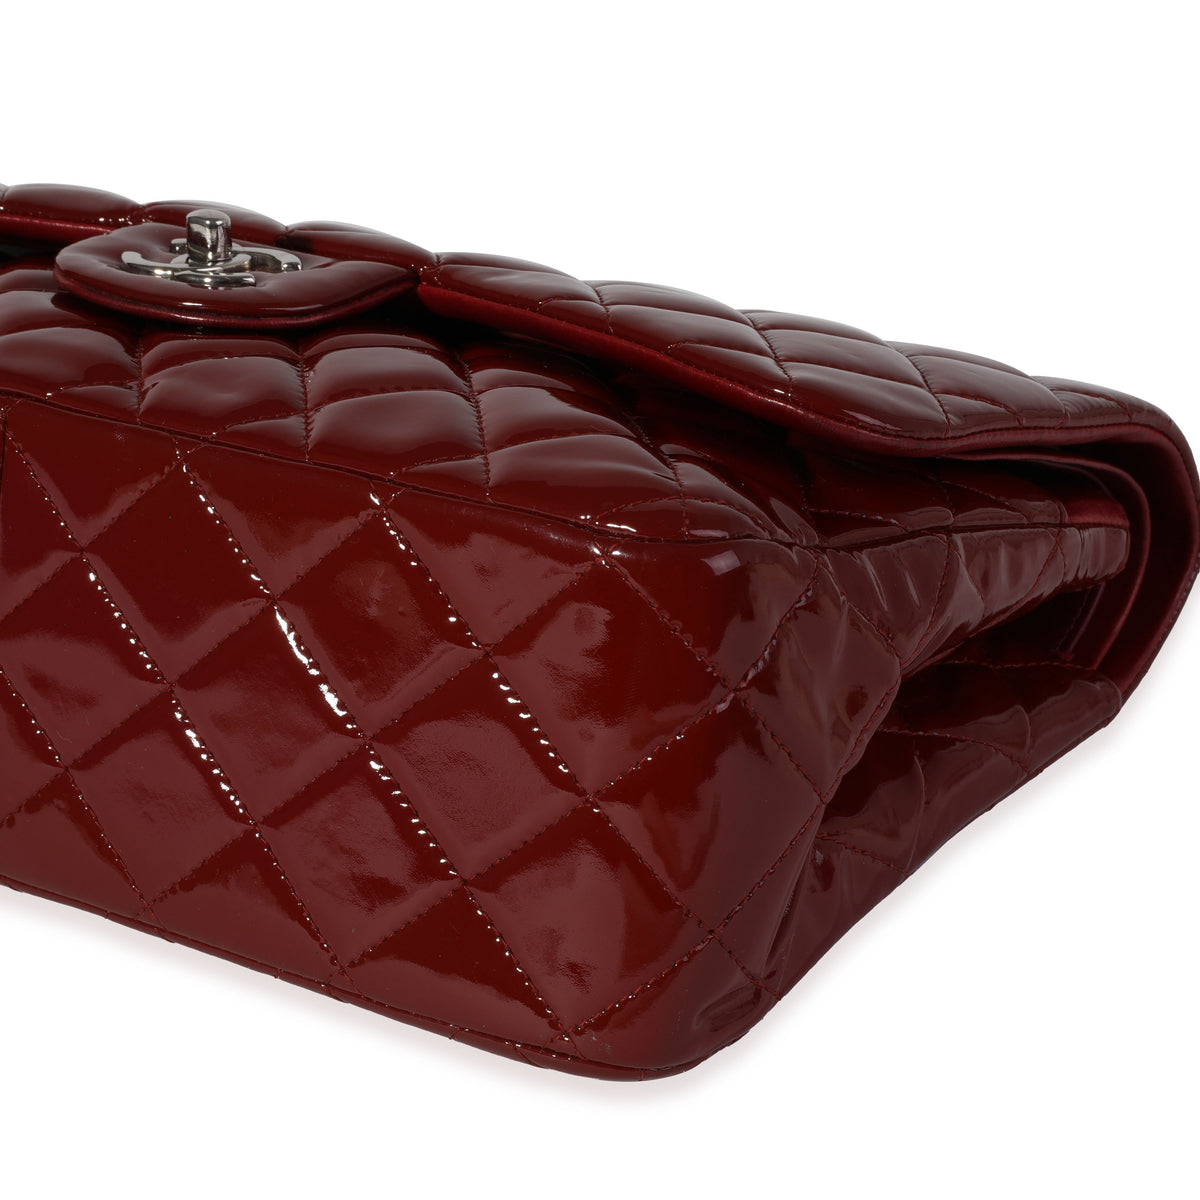 Chanel Dark Red Quilted Patent Leather Jumbo Classic Double Flap Bag